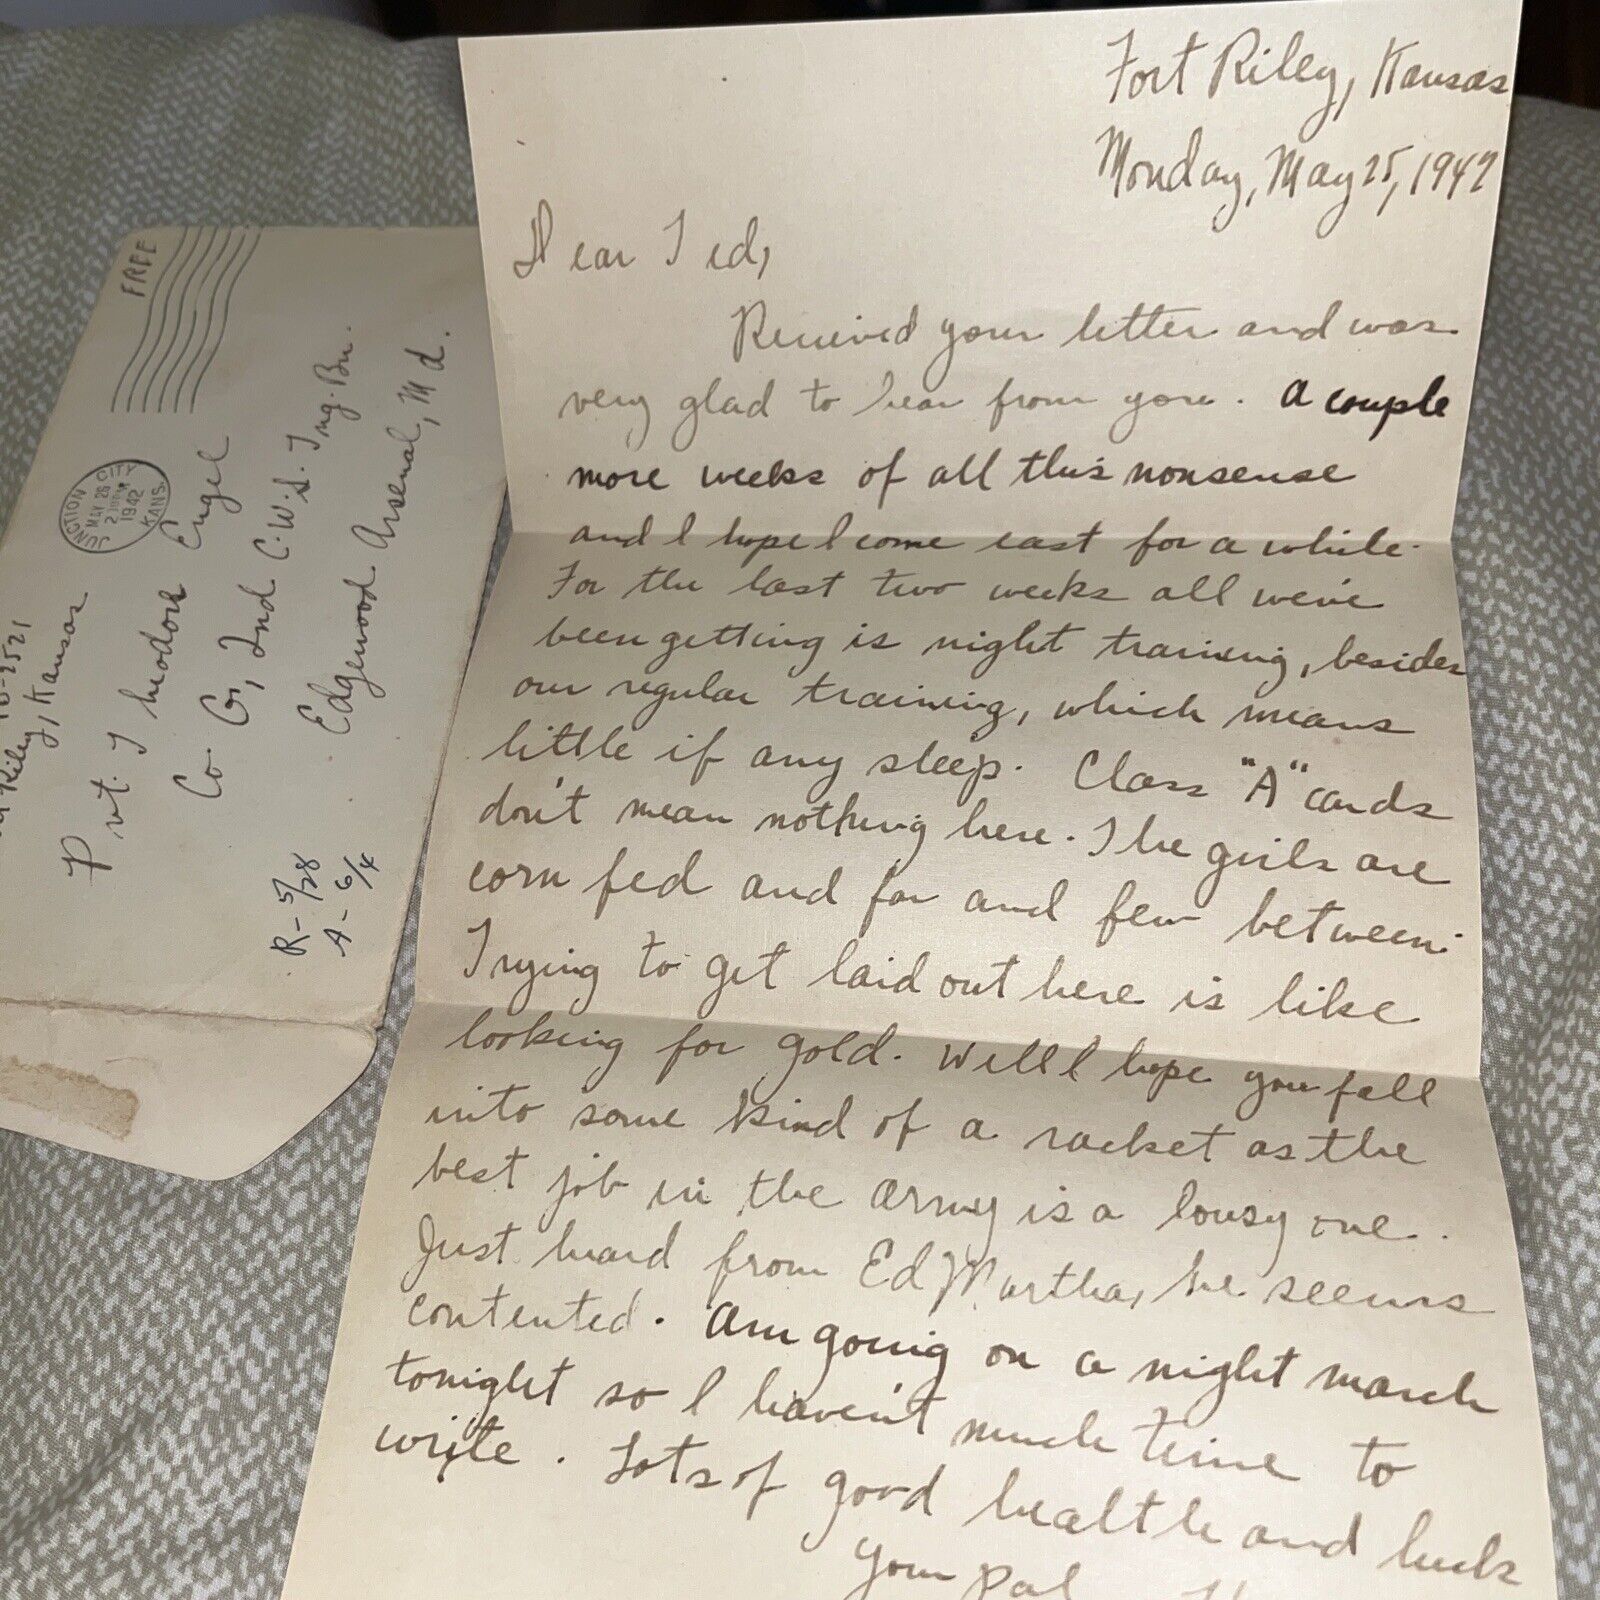 1942 WWII Letter from Fort Riley Kansas Private: Getting Laid Like Seeking Gold